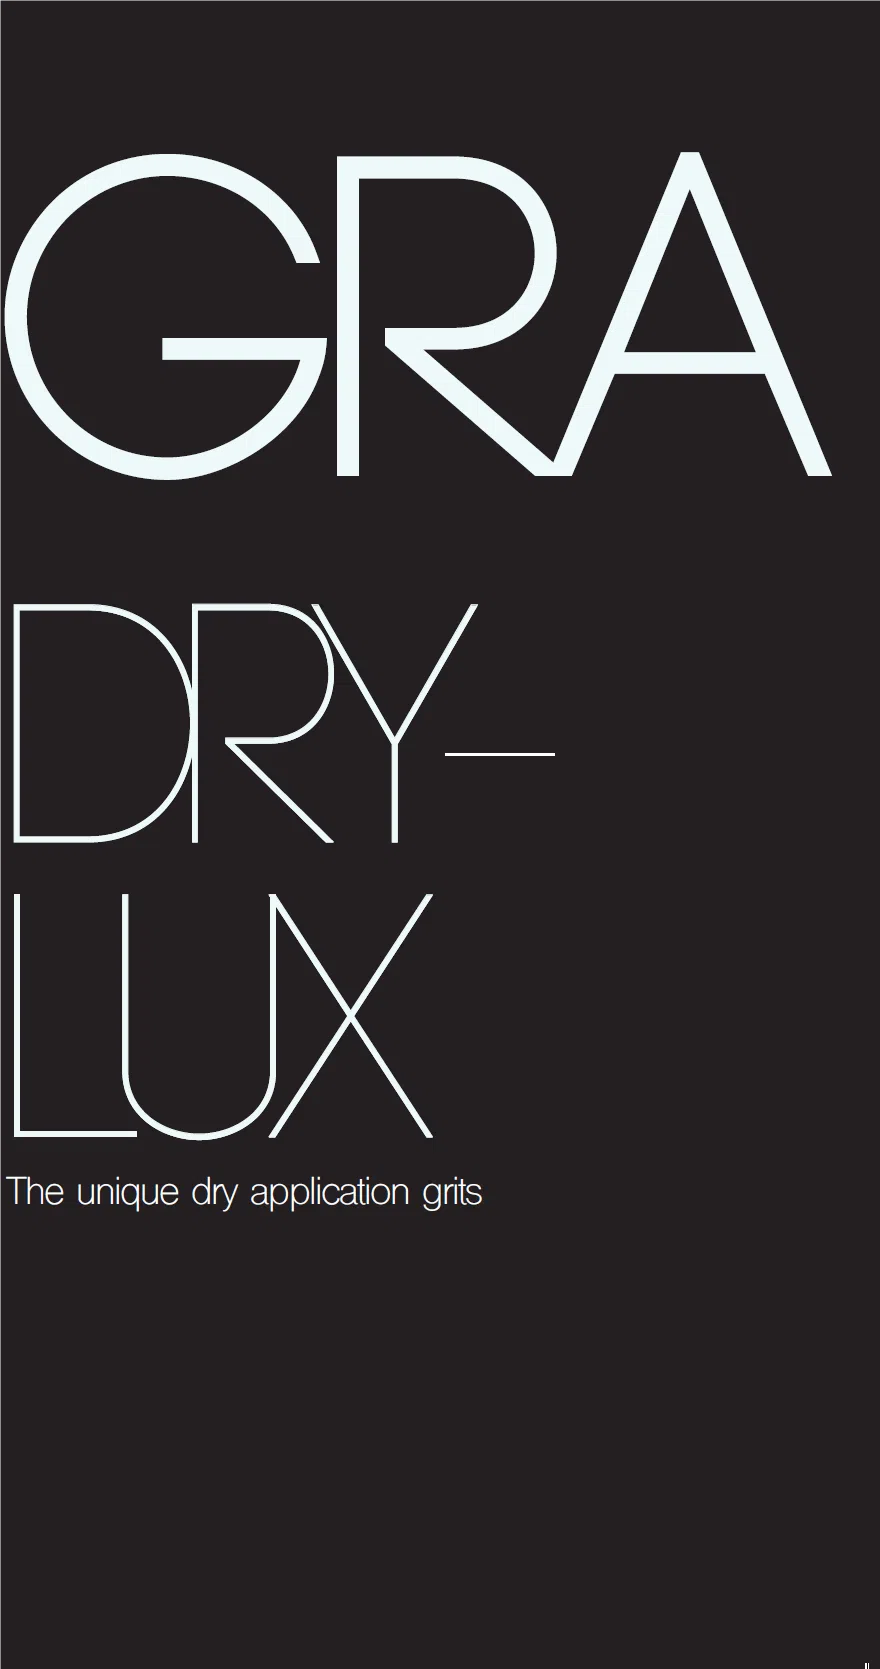 G R A DRY-LUX SERIES